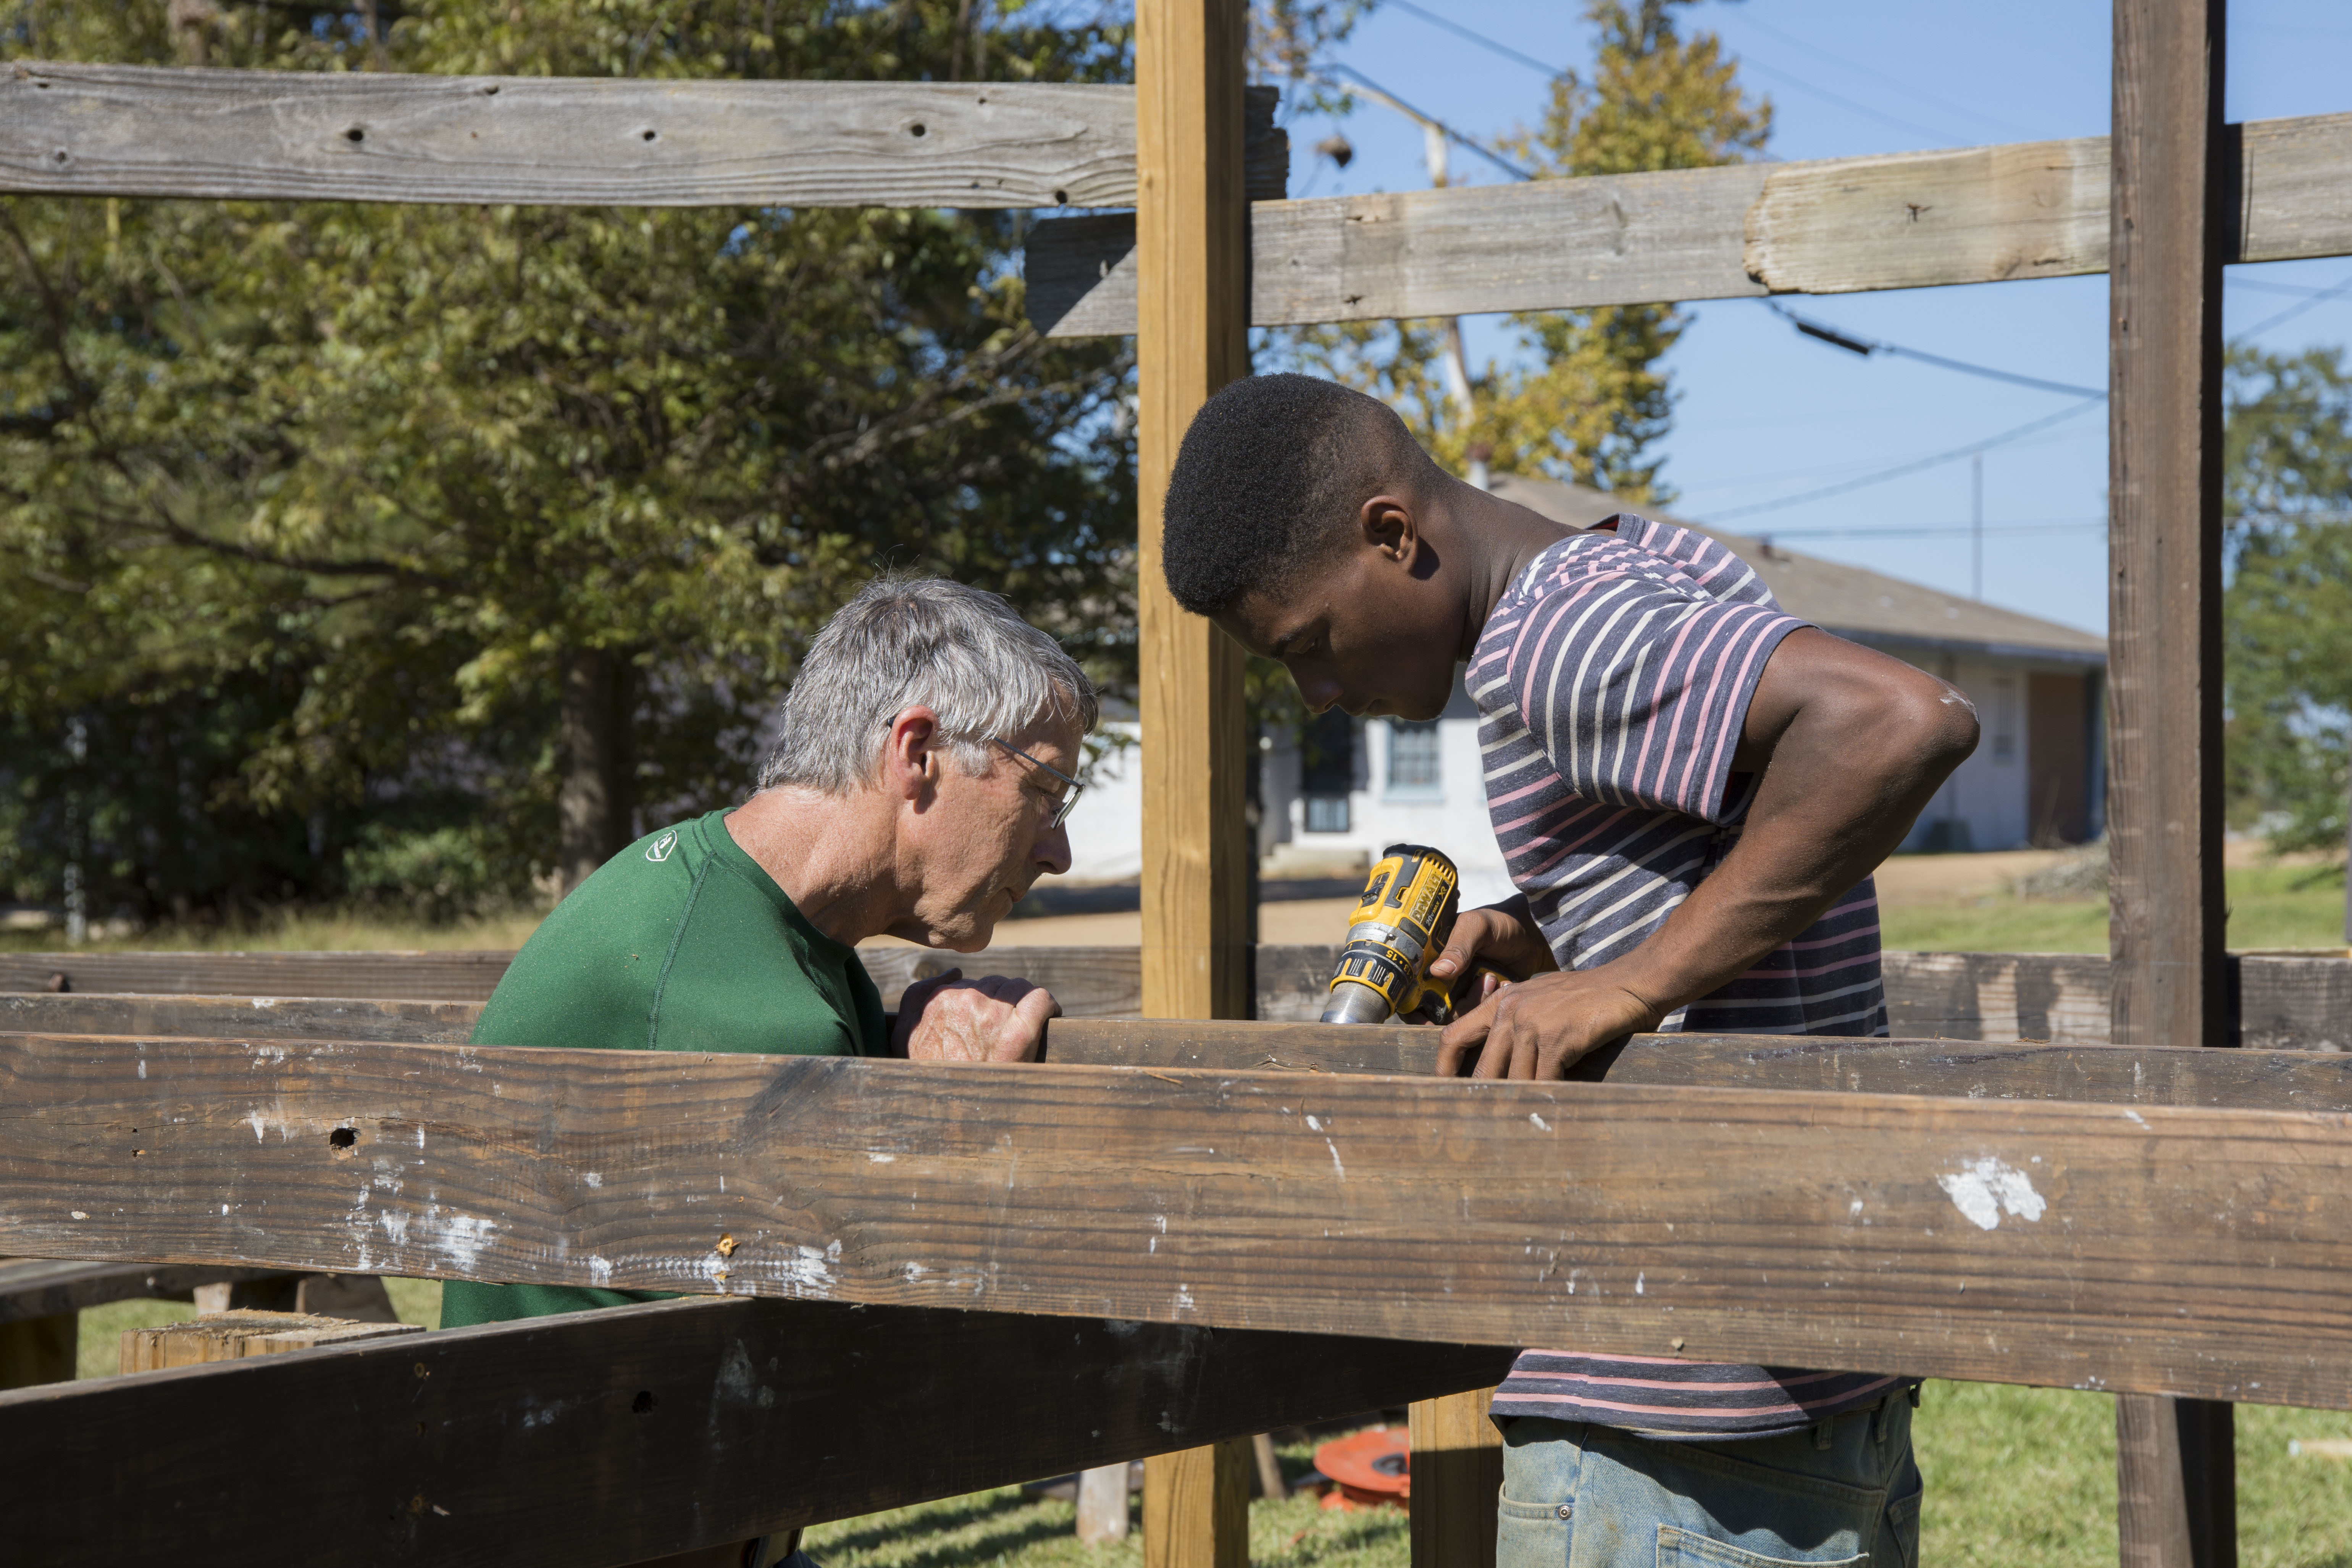 Youth Apprentices build out huge porch and learn new skills with visiting master builder, Ben!